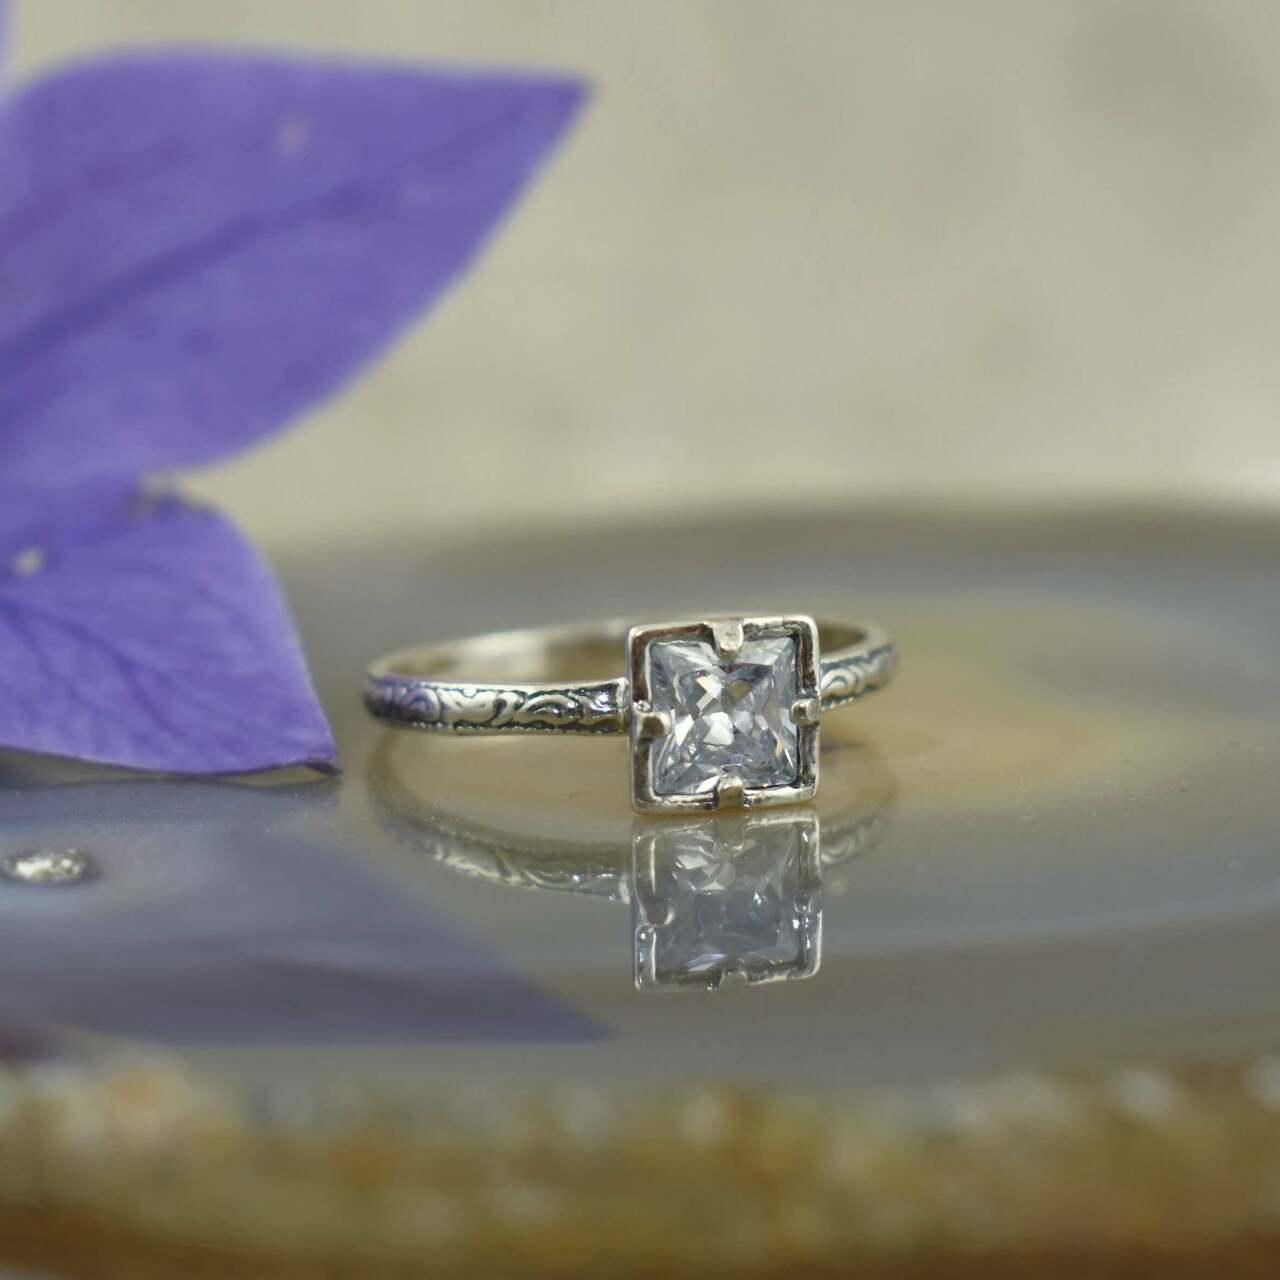 Handcrafted sterling silver and CZ ring